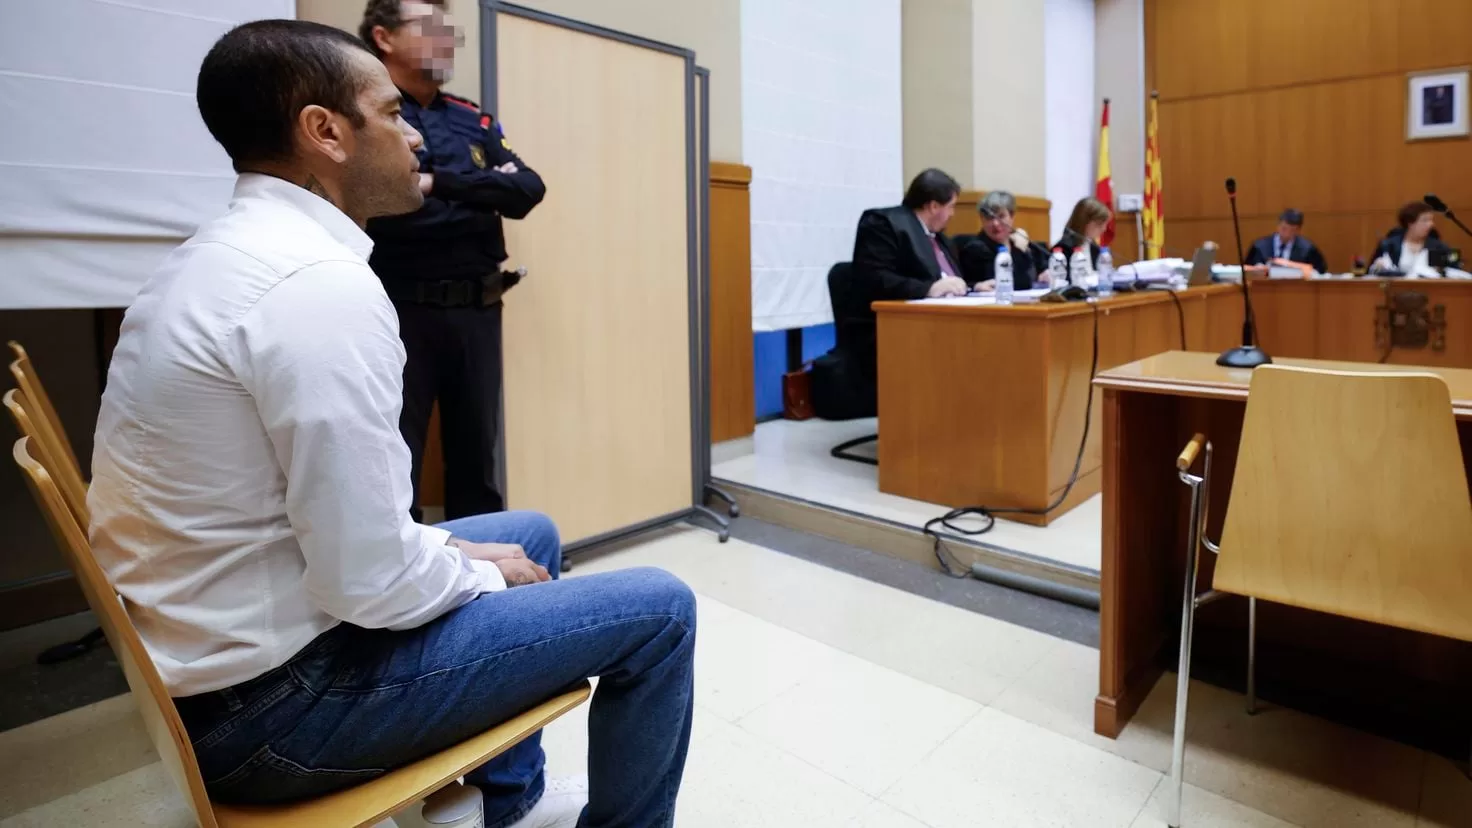 A fellow prisoner of Alves: he considers the trial lost
